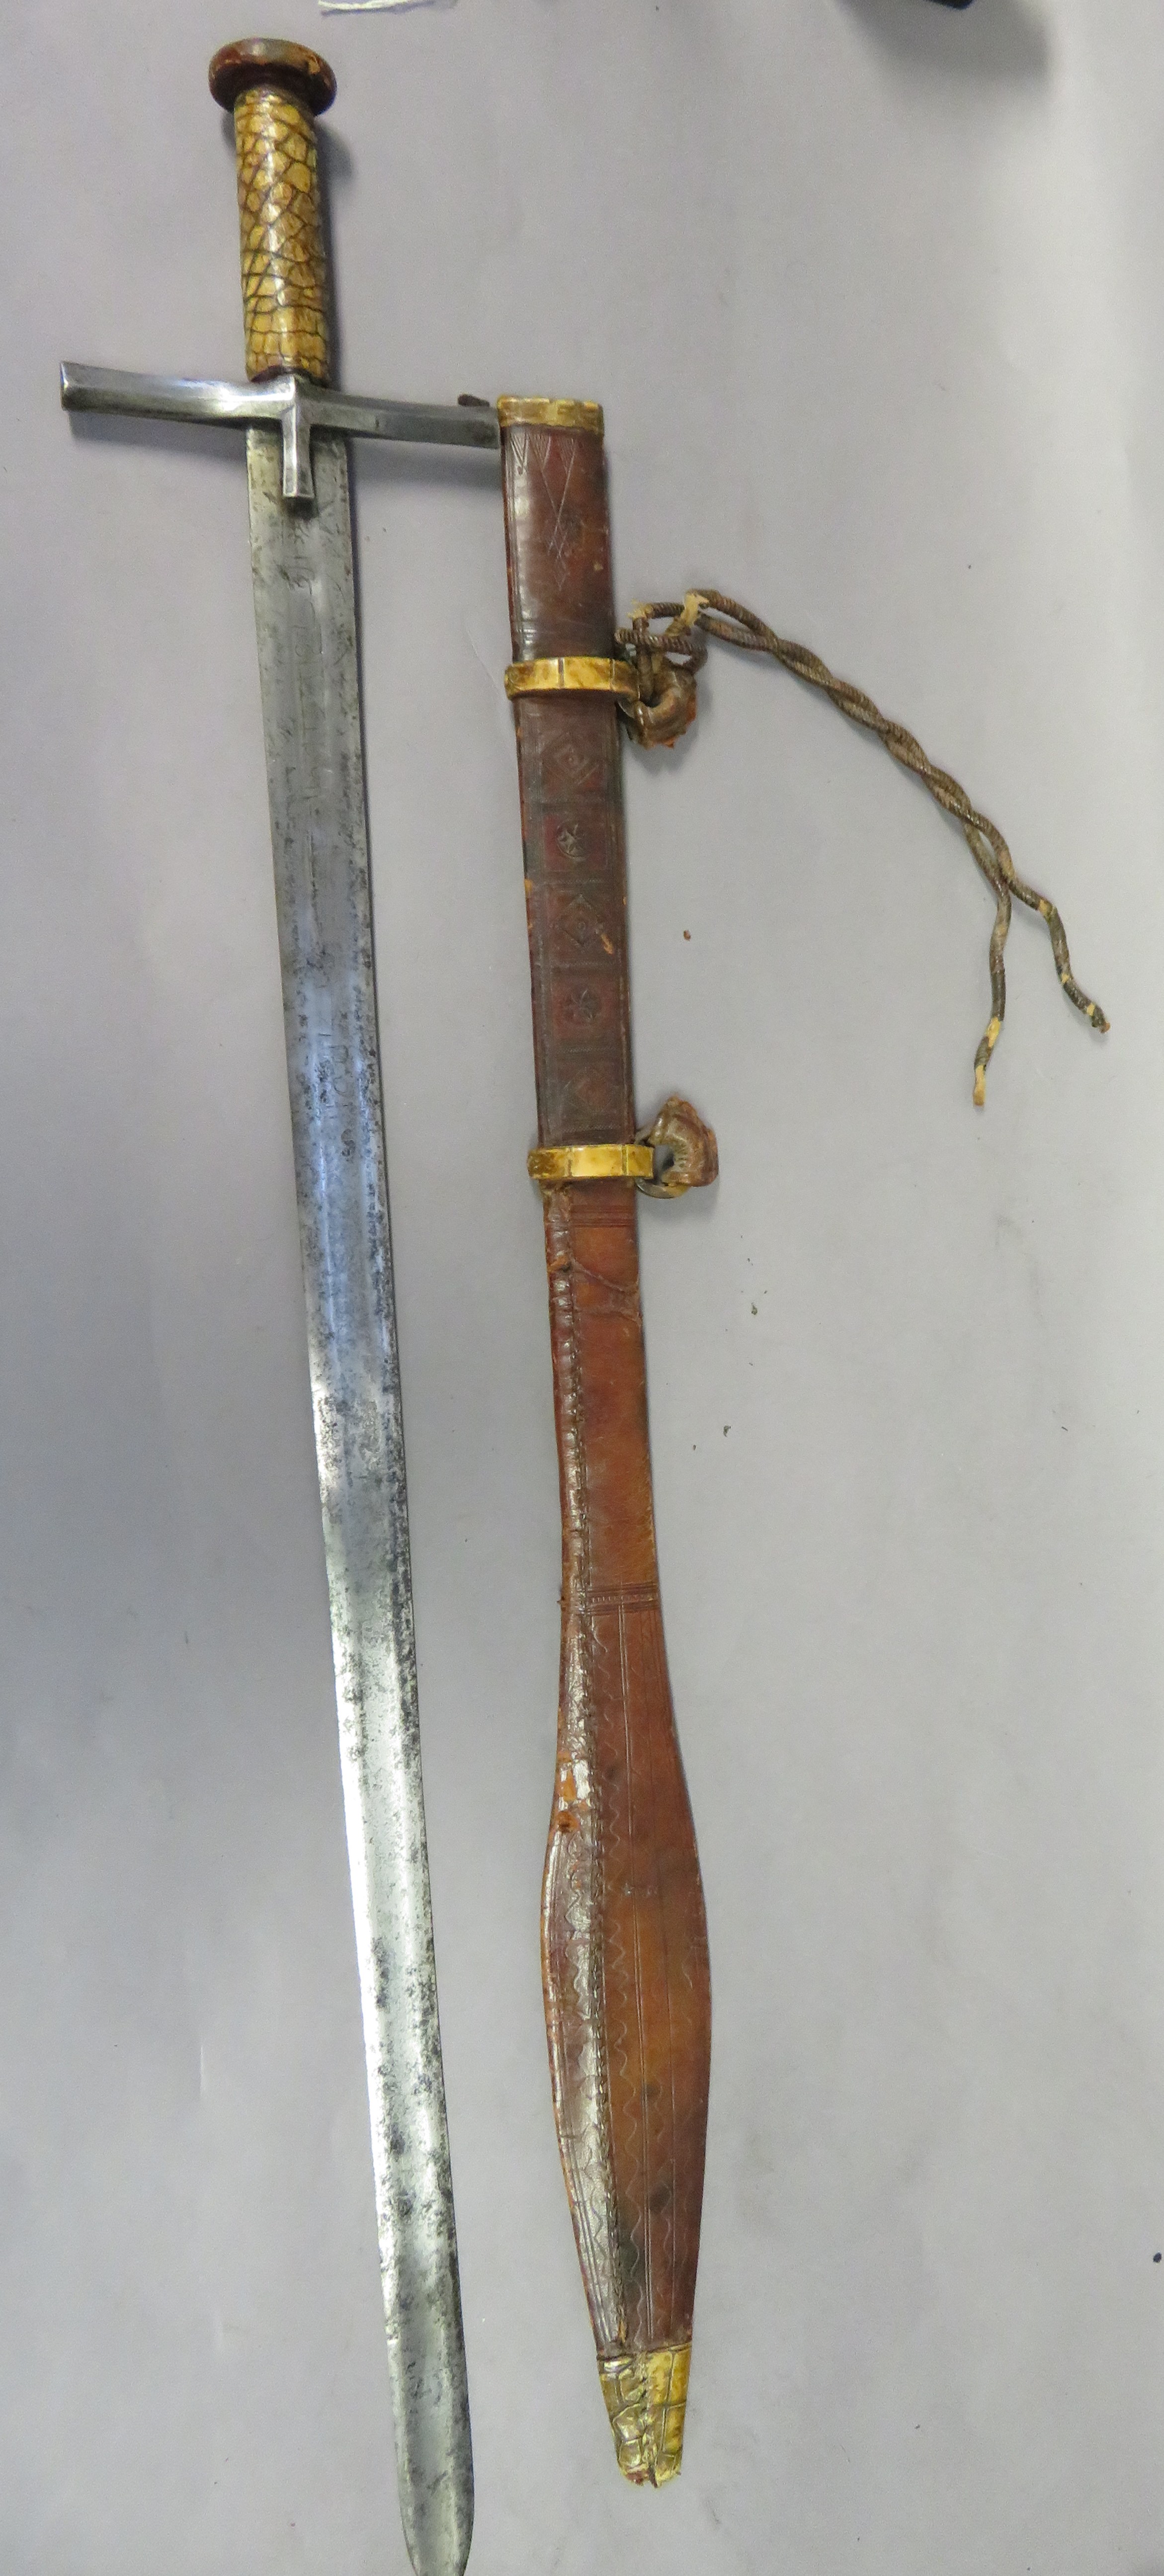 A SUDANESE SWORD (KASKARA), LATE 19TH CENTURY with broad double-edged blade cut with an